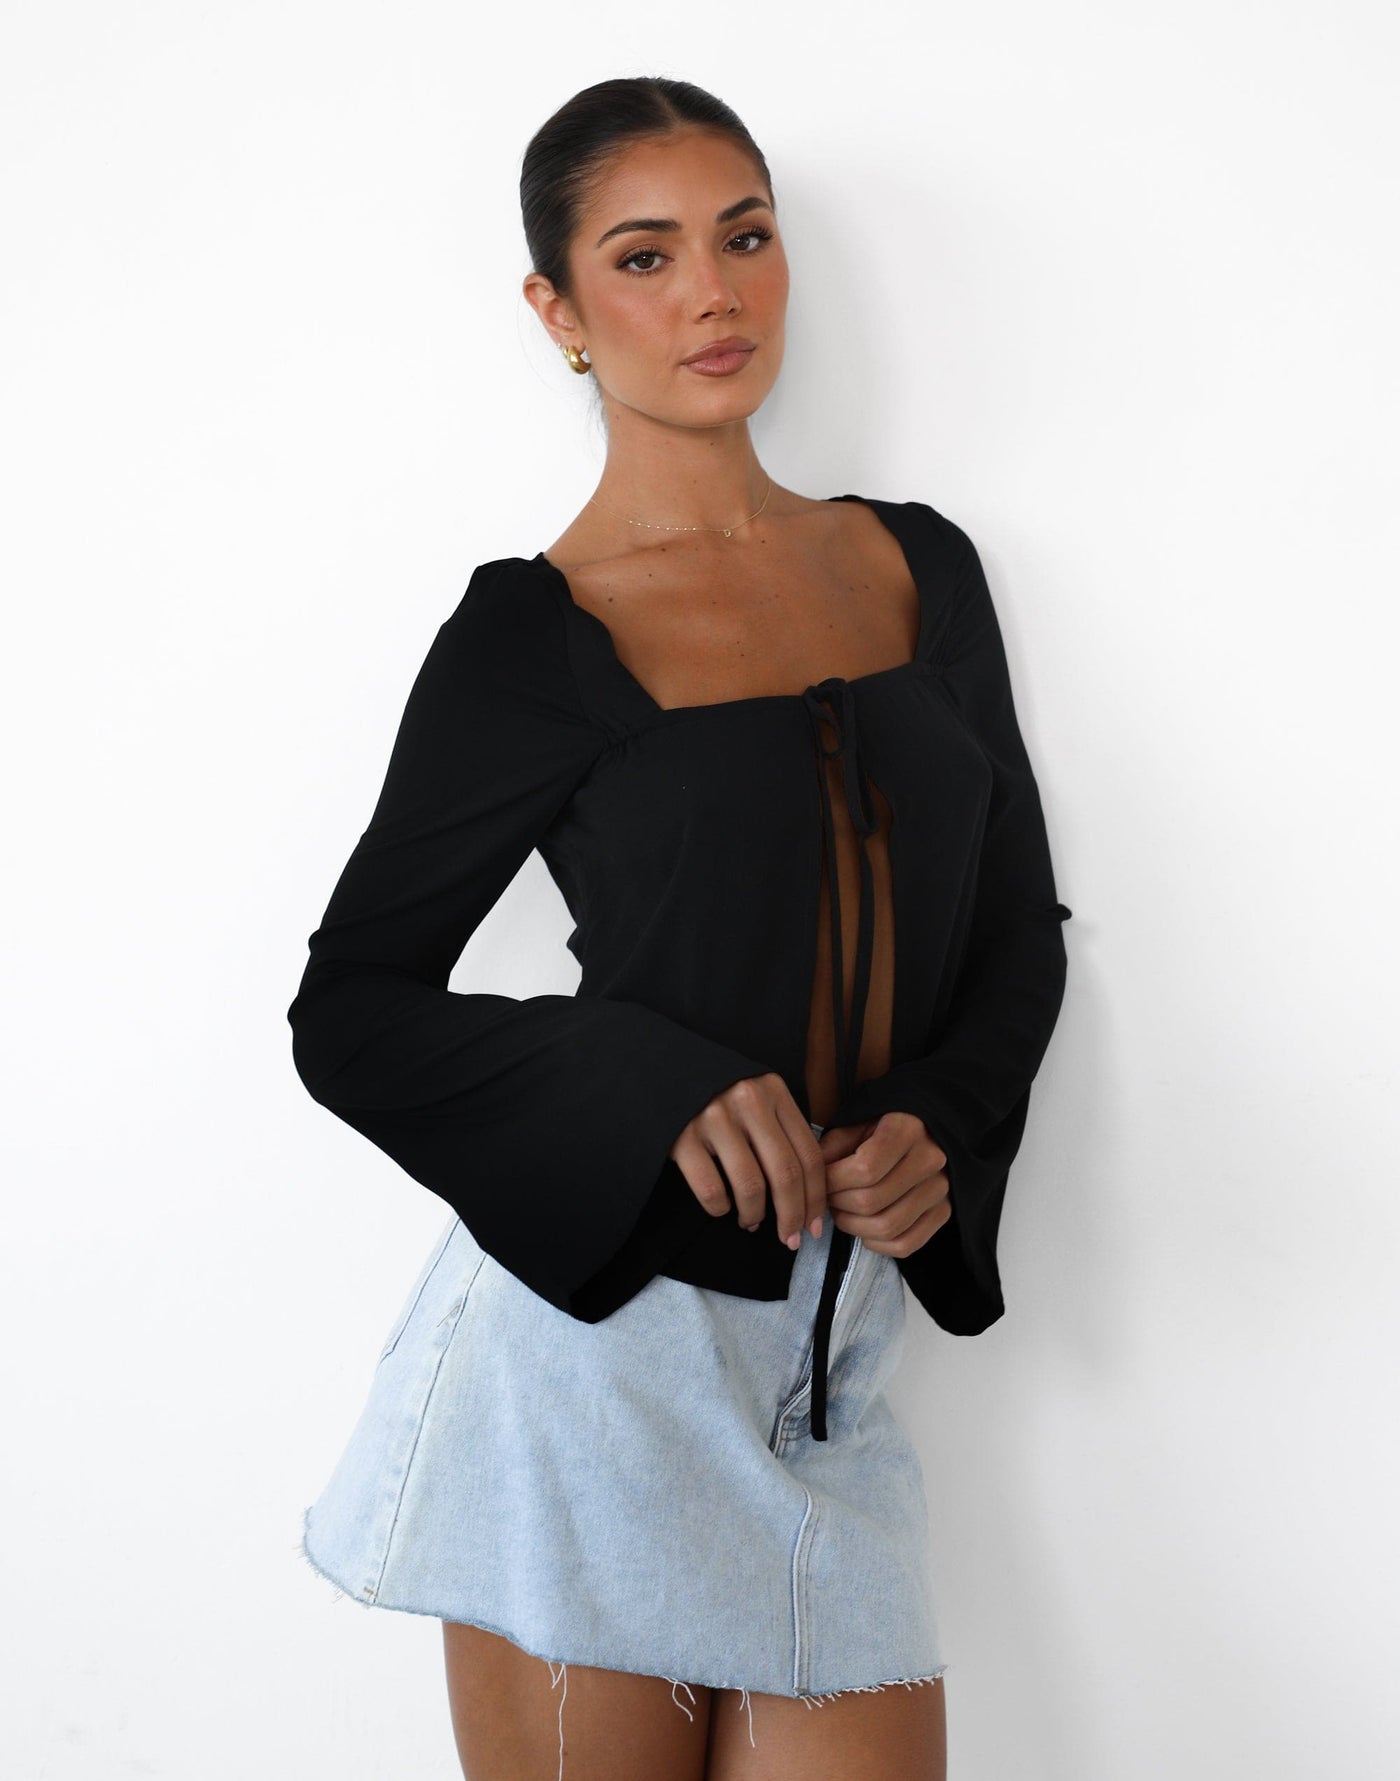 Tahiti Long Sleeve Top (Black) - Open Front Long Sleeve Top - Women's Top - Charcoal Clothing